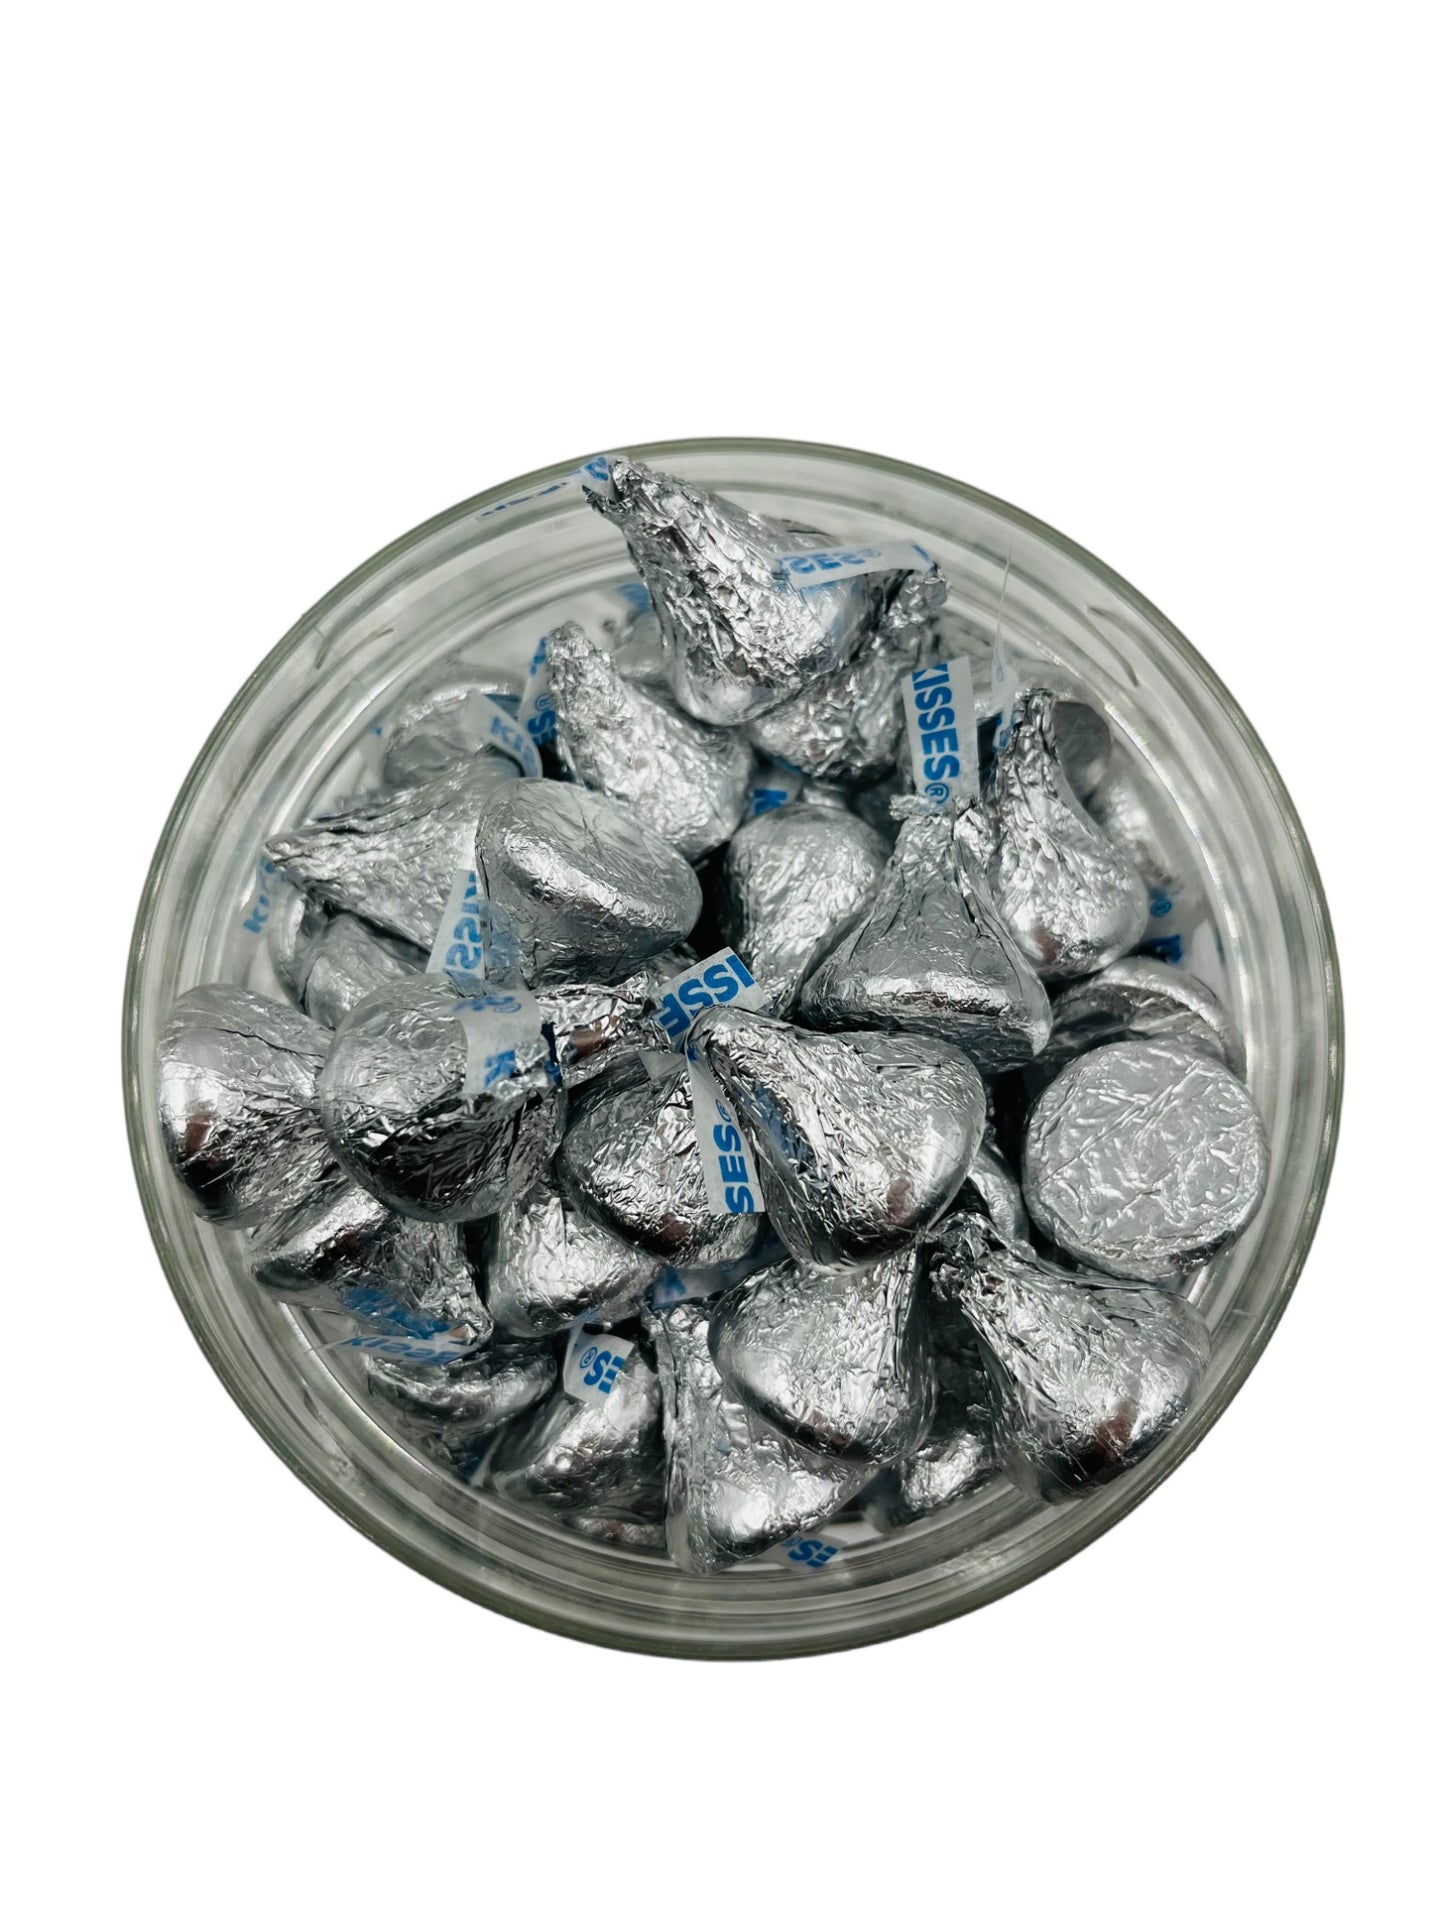 Simway Sweets Jar 780g - Hershey Kisses - Individually Wrapped American Chocolate - Approximately 164 Pieces